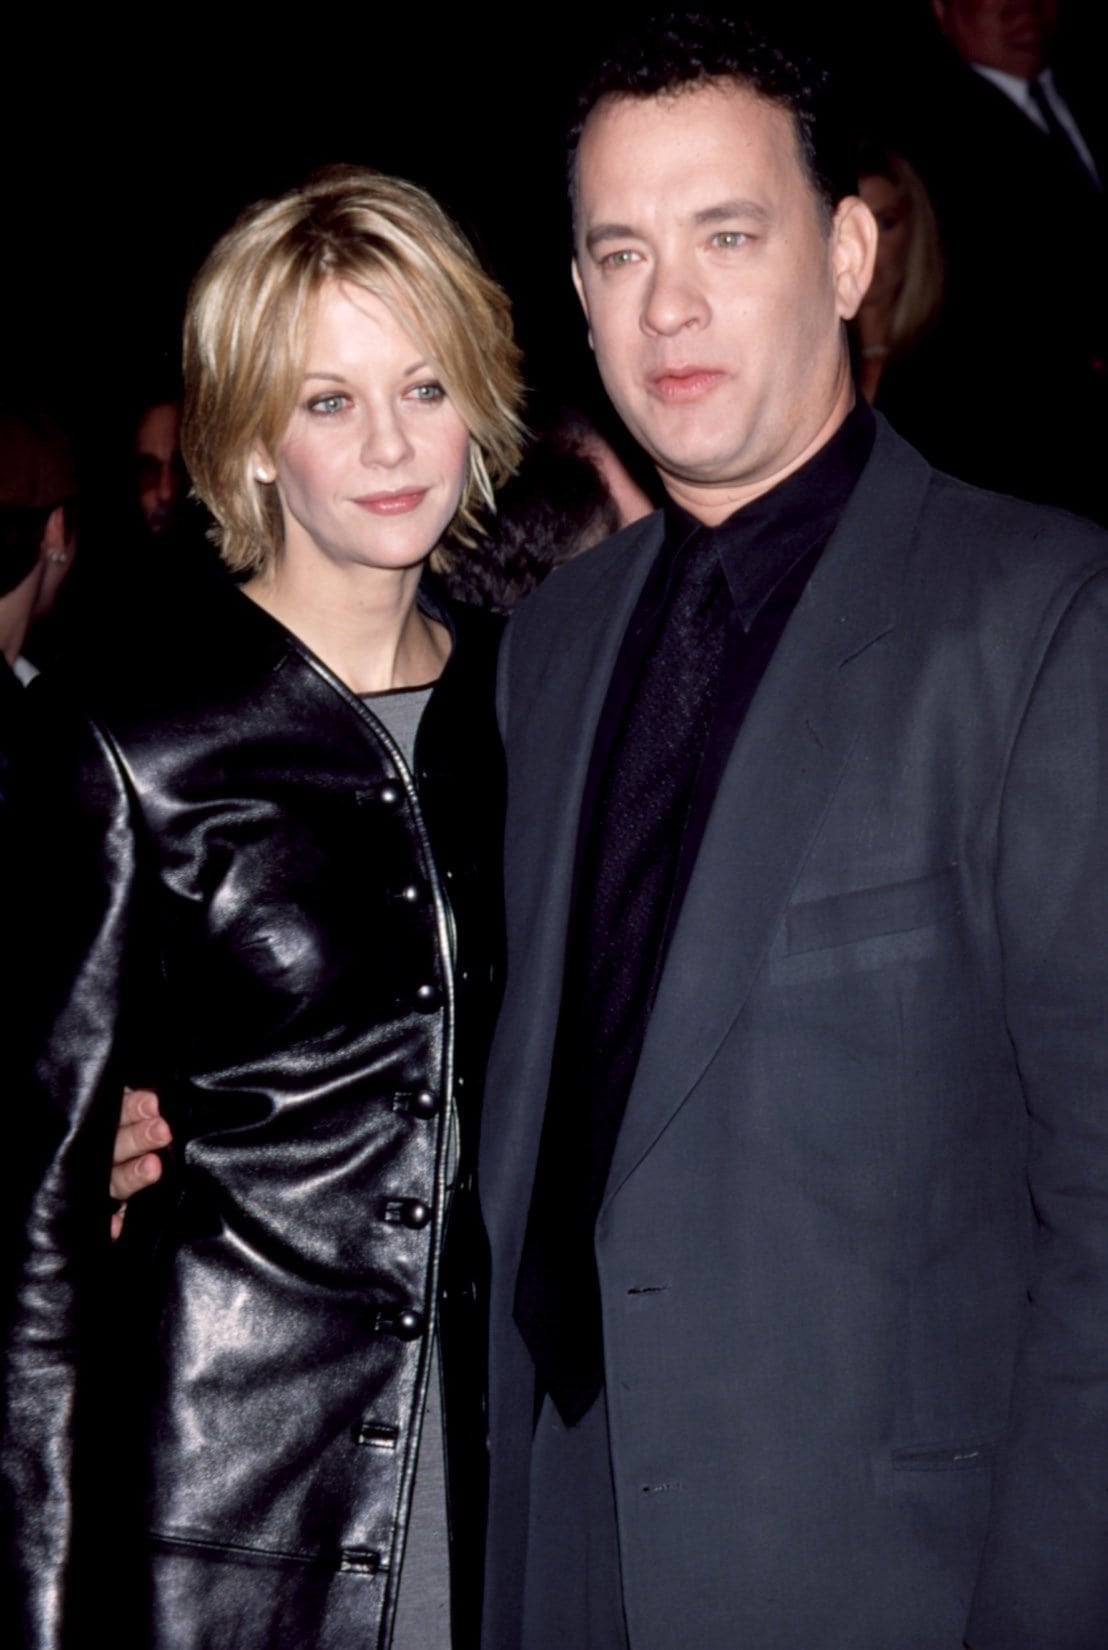 Meg Ryan and Tom Hanks at the premiere of You've Got Mail in New York City on December 10, 19